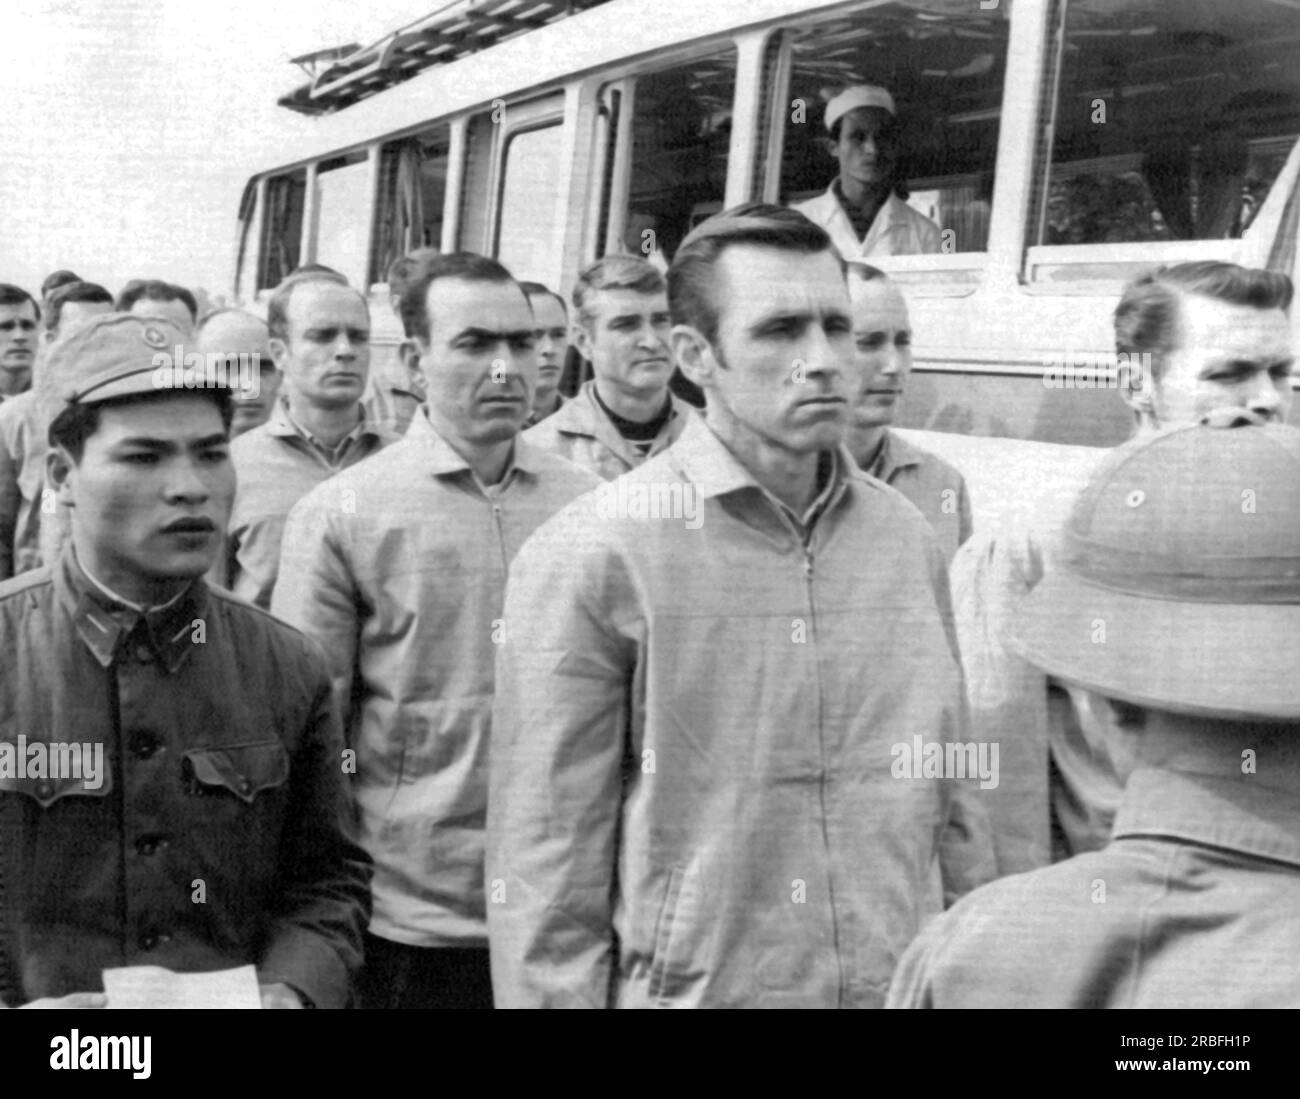 Hanoi, North Vietnam: February 19, 1973 American POWs await transfer to American officers after being transported by bus to Hanoi's Gia Lam aiport. Stock Photo